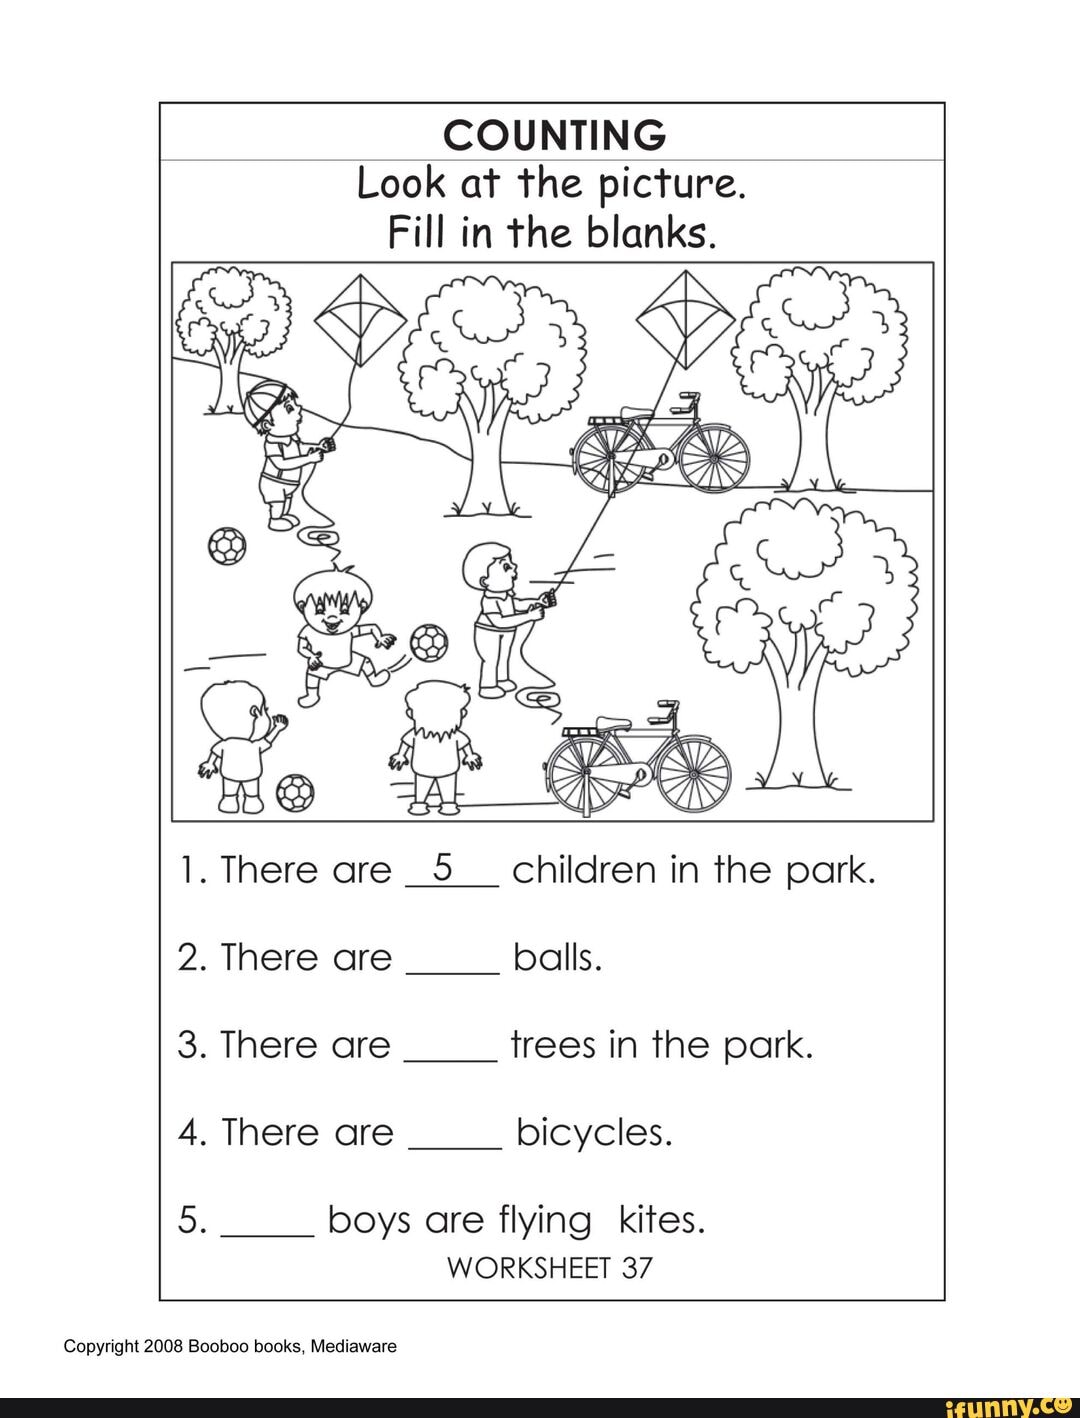 1-per-lovely-story-mini-course-math-education-or-fun-children-s-storyboard-interested